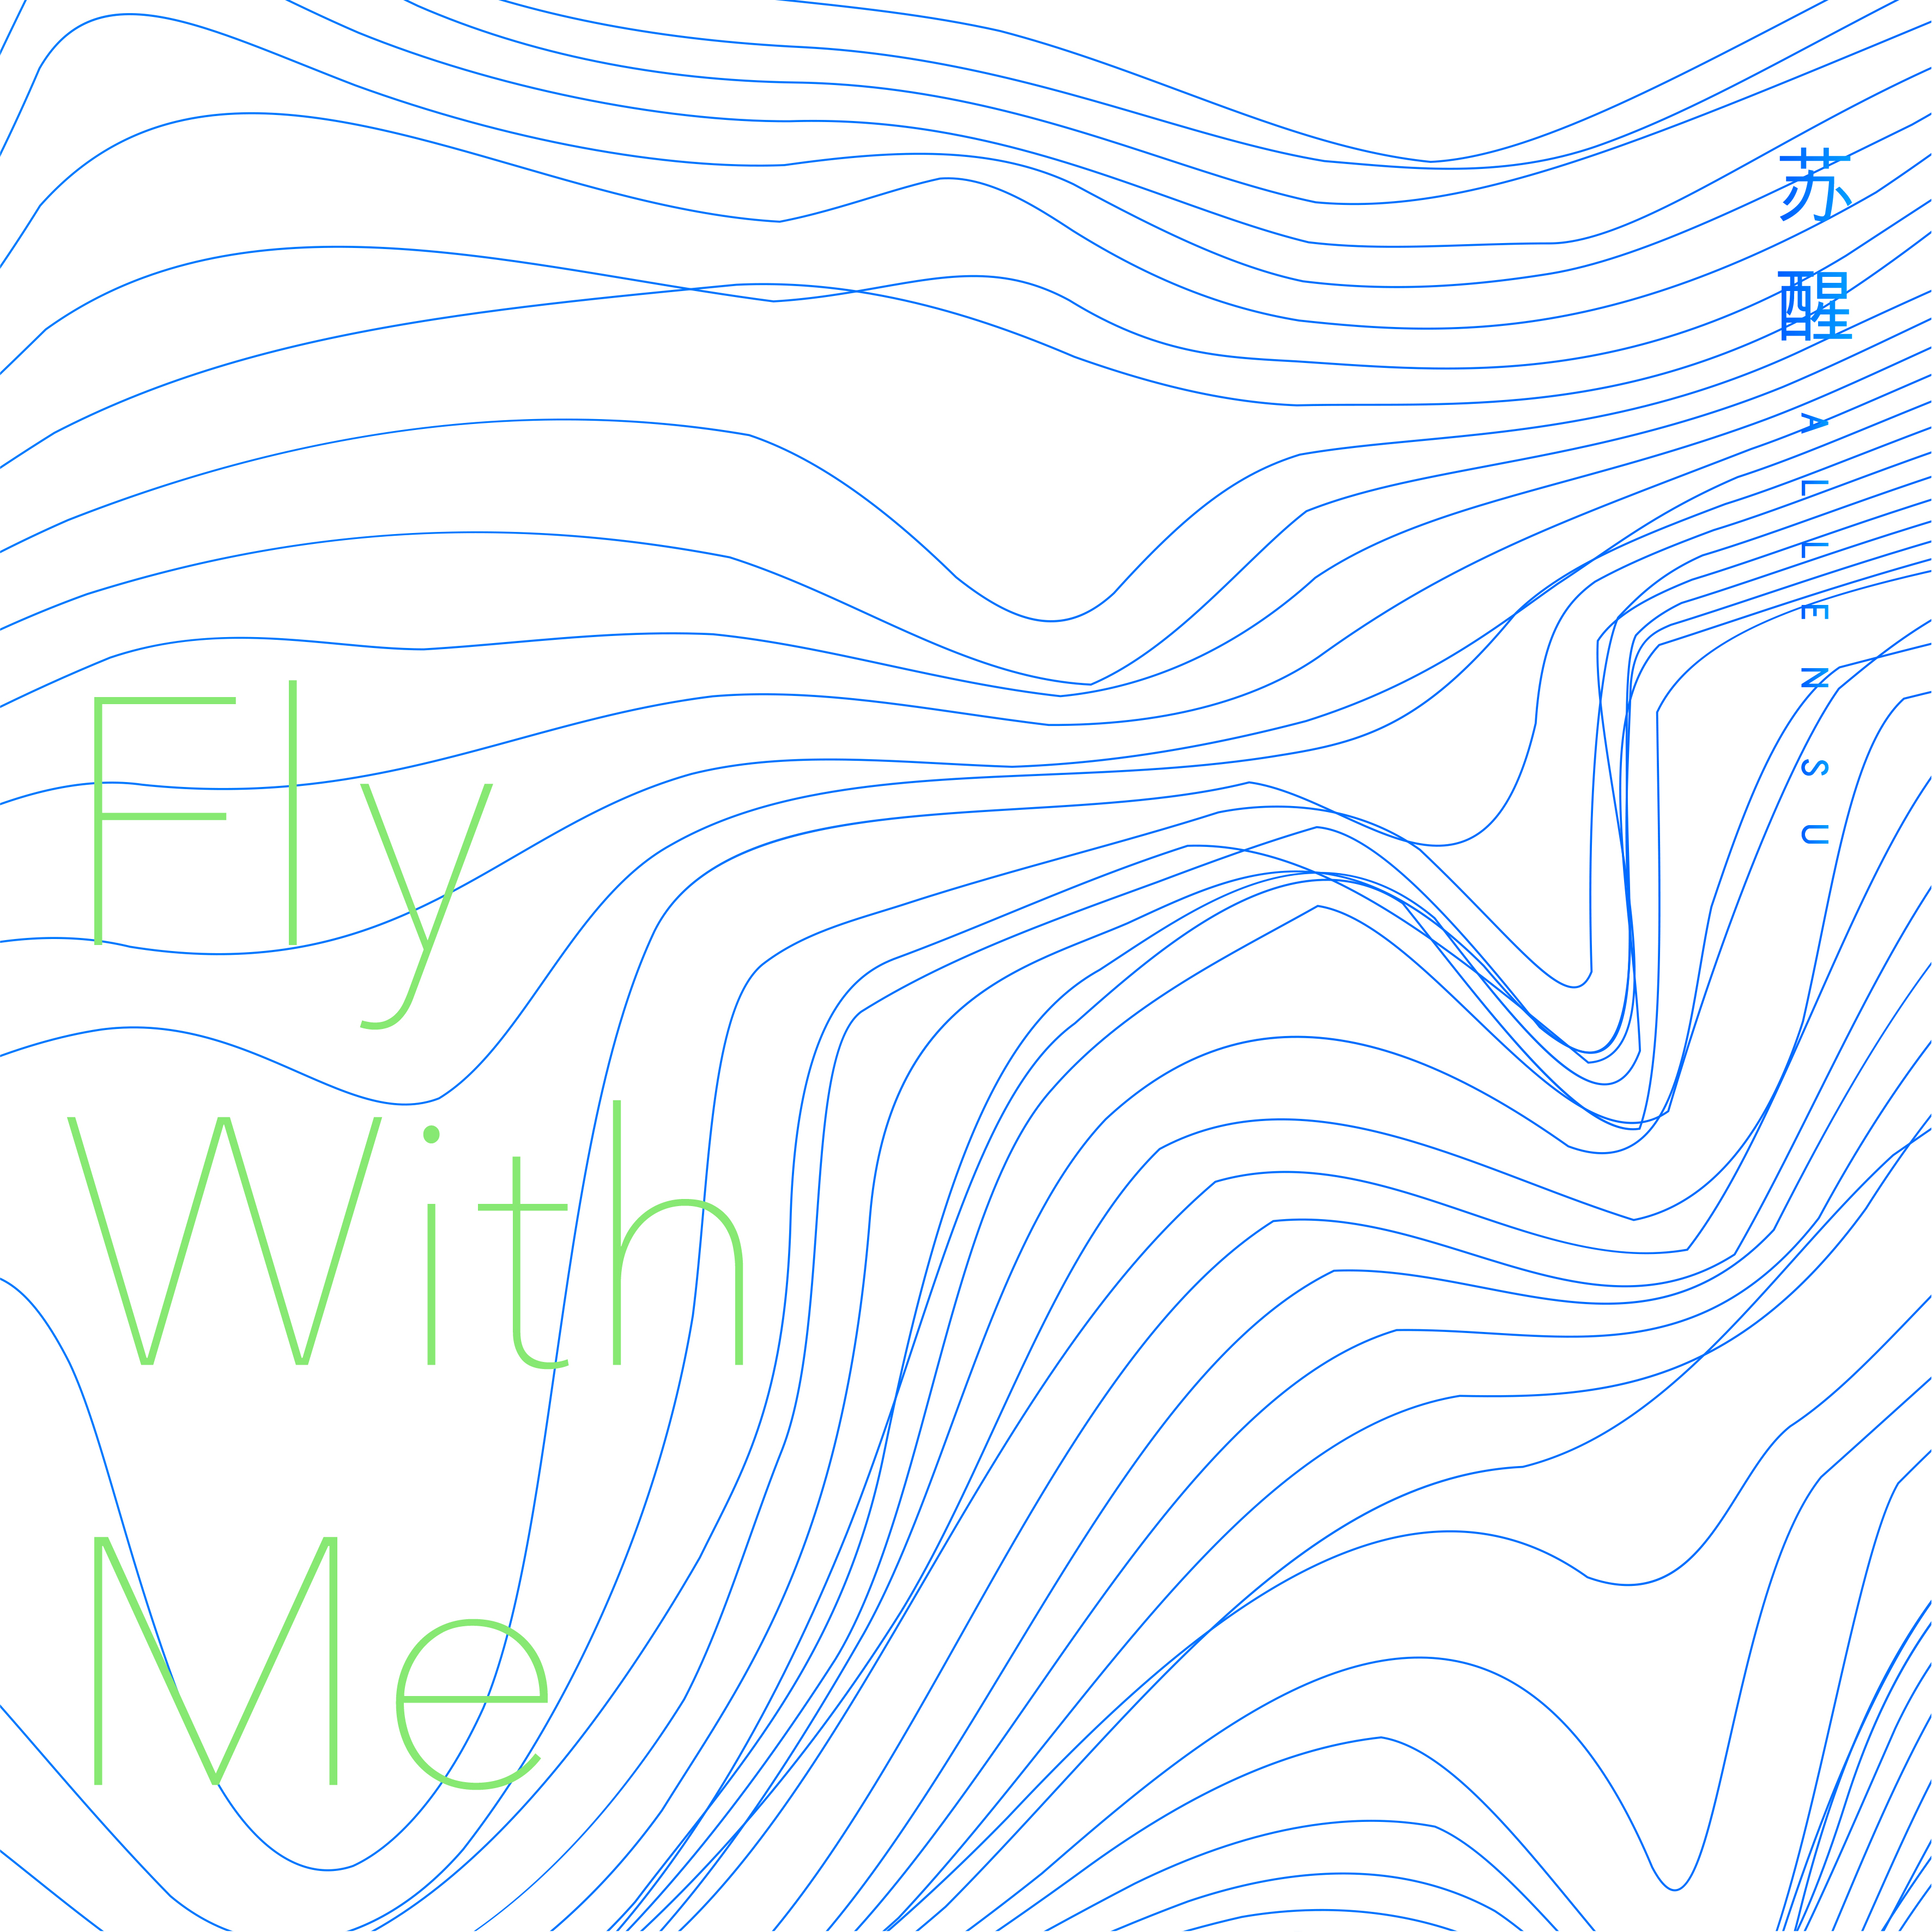 Fly with me(甦醒演唱歌曲)